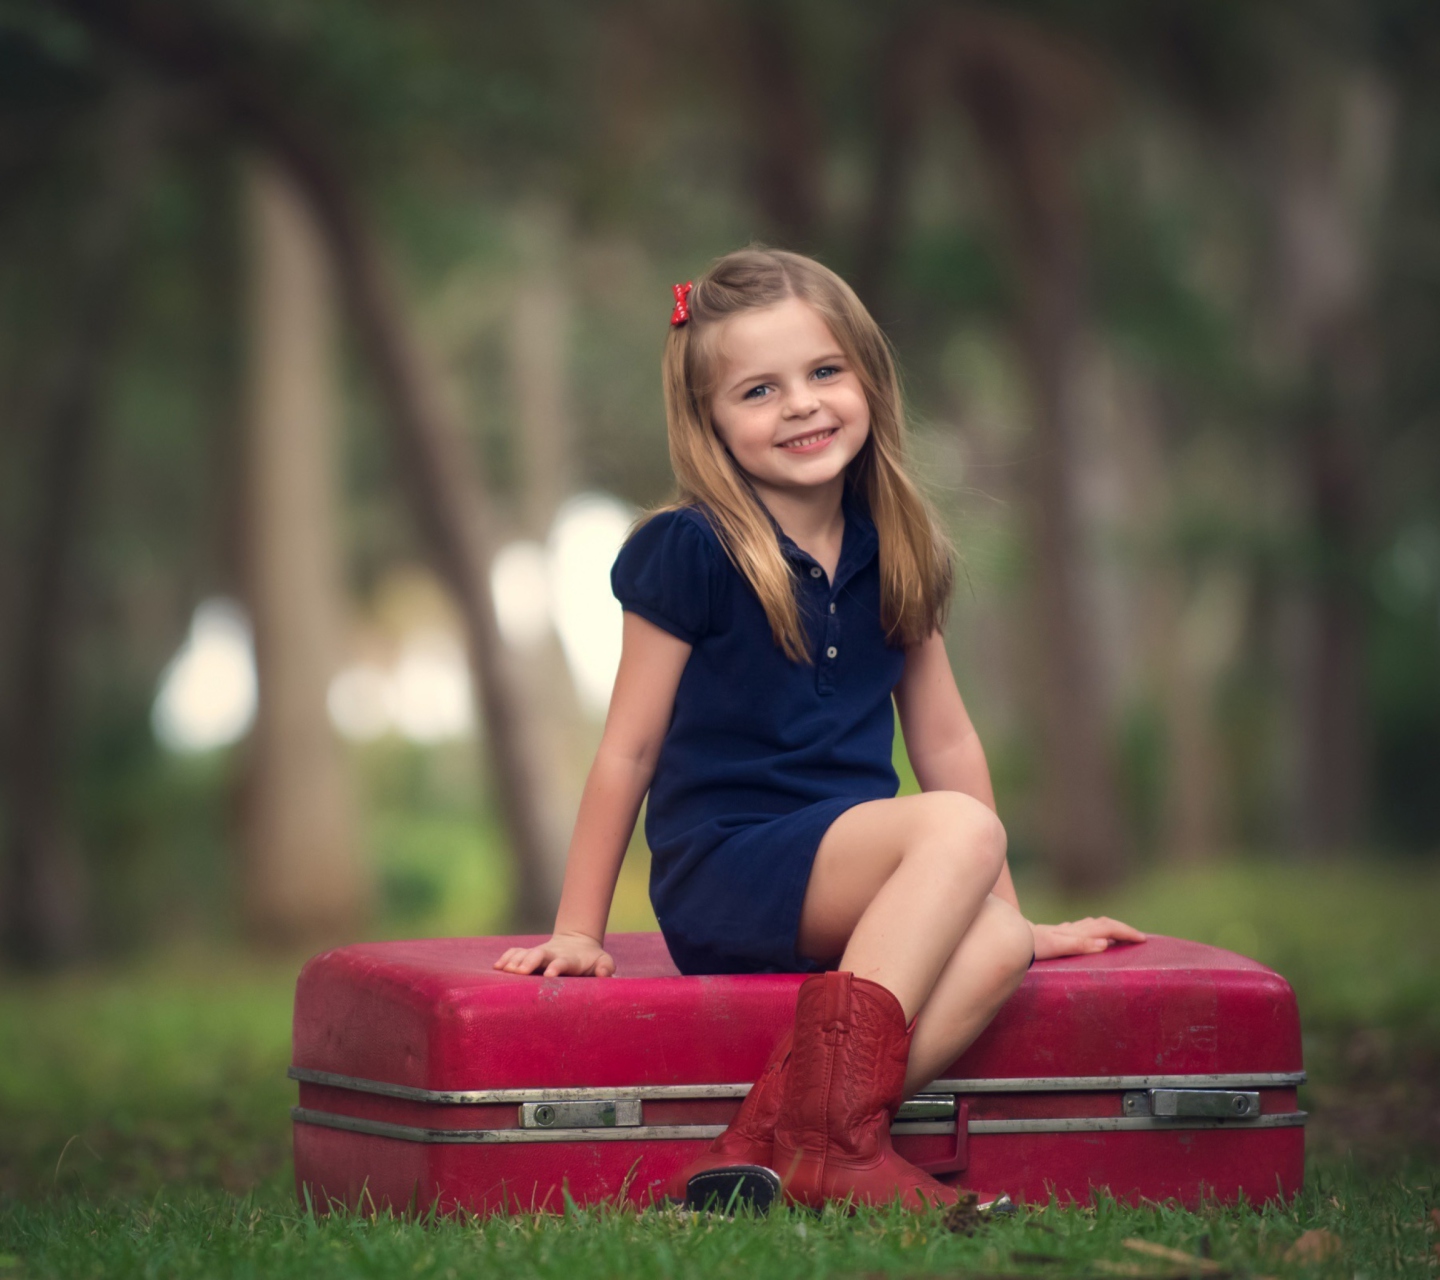 Das Little Girl Sitting On Red Suitcase Wallpaper 1440x1280